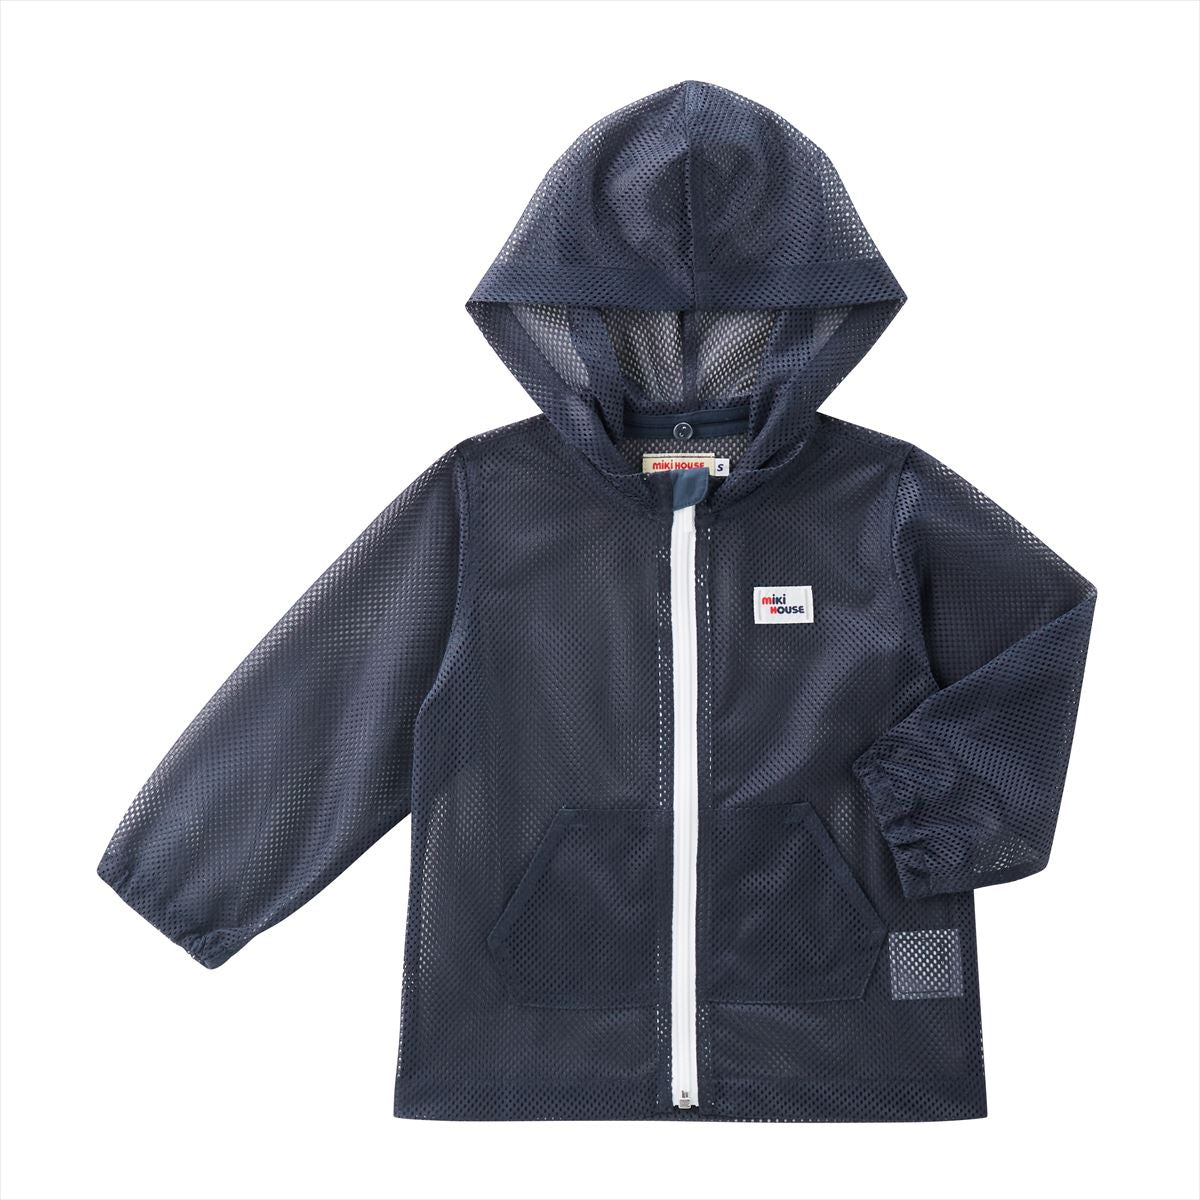 Mesh jacket with Insect Shield in Navy - MIKI HOUSE USA